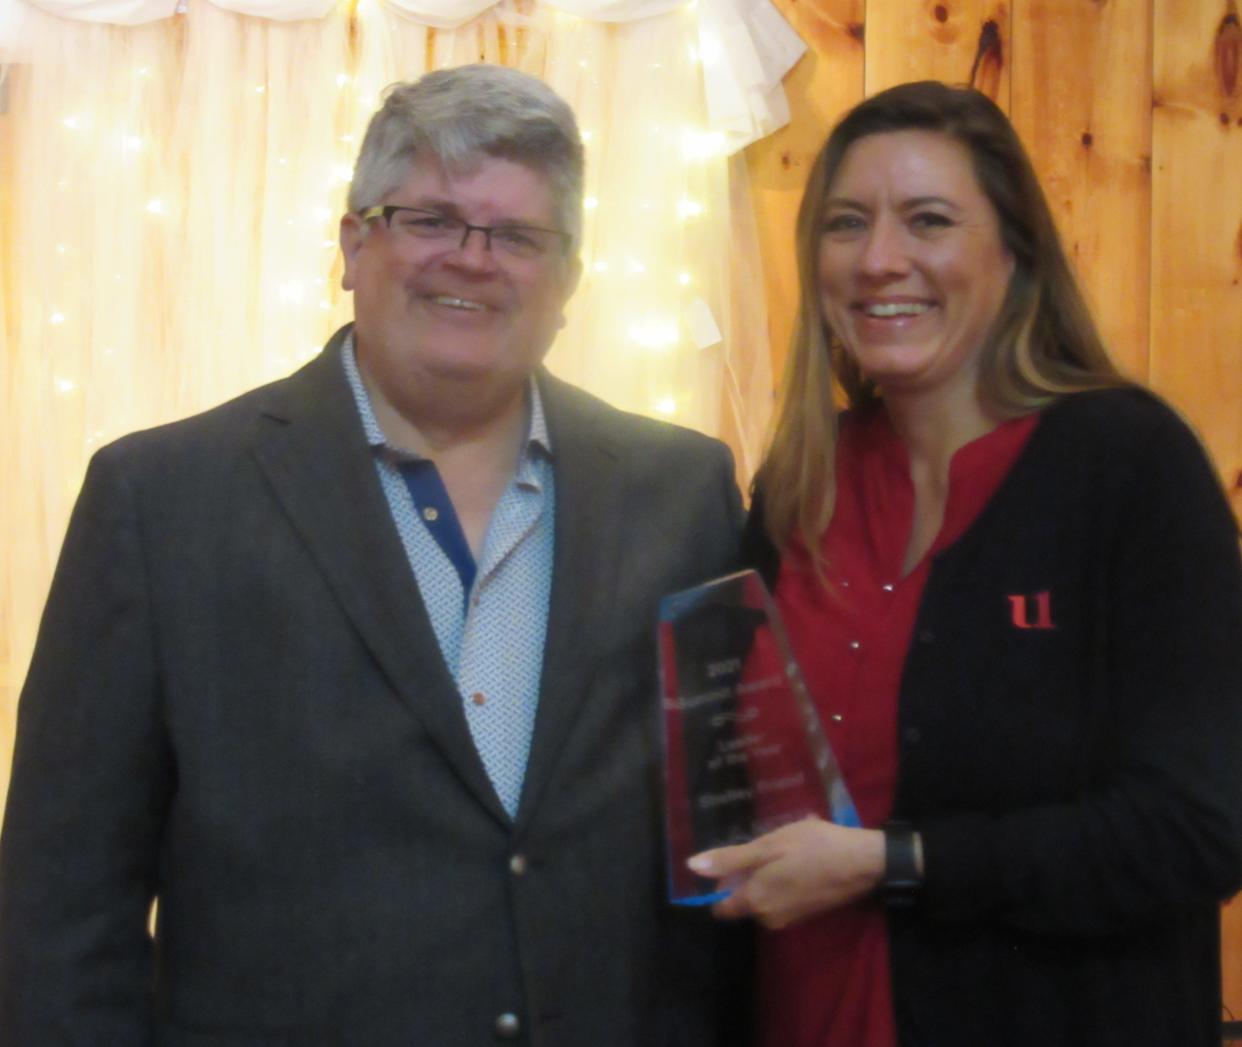 Shelley Friend (right) was recognized as Mineral County’s Leader of the Year during the annual Summit Awards. Shown presenting her award is Chamber of Commerce president Randy Crane.